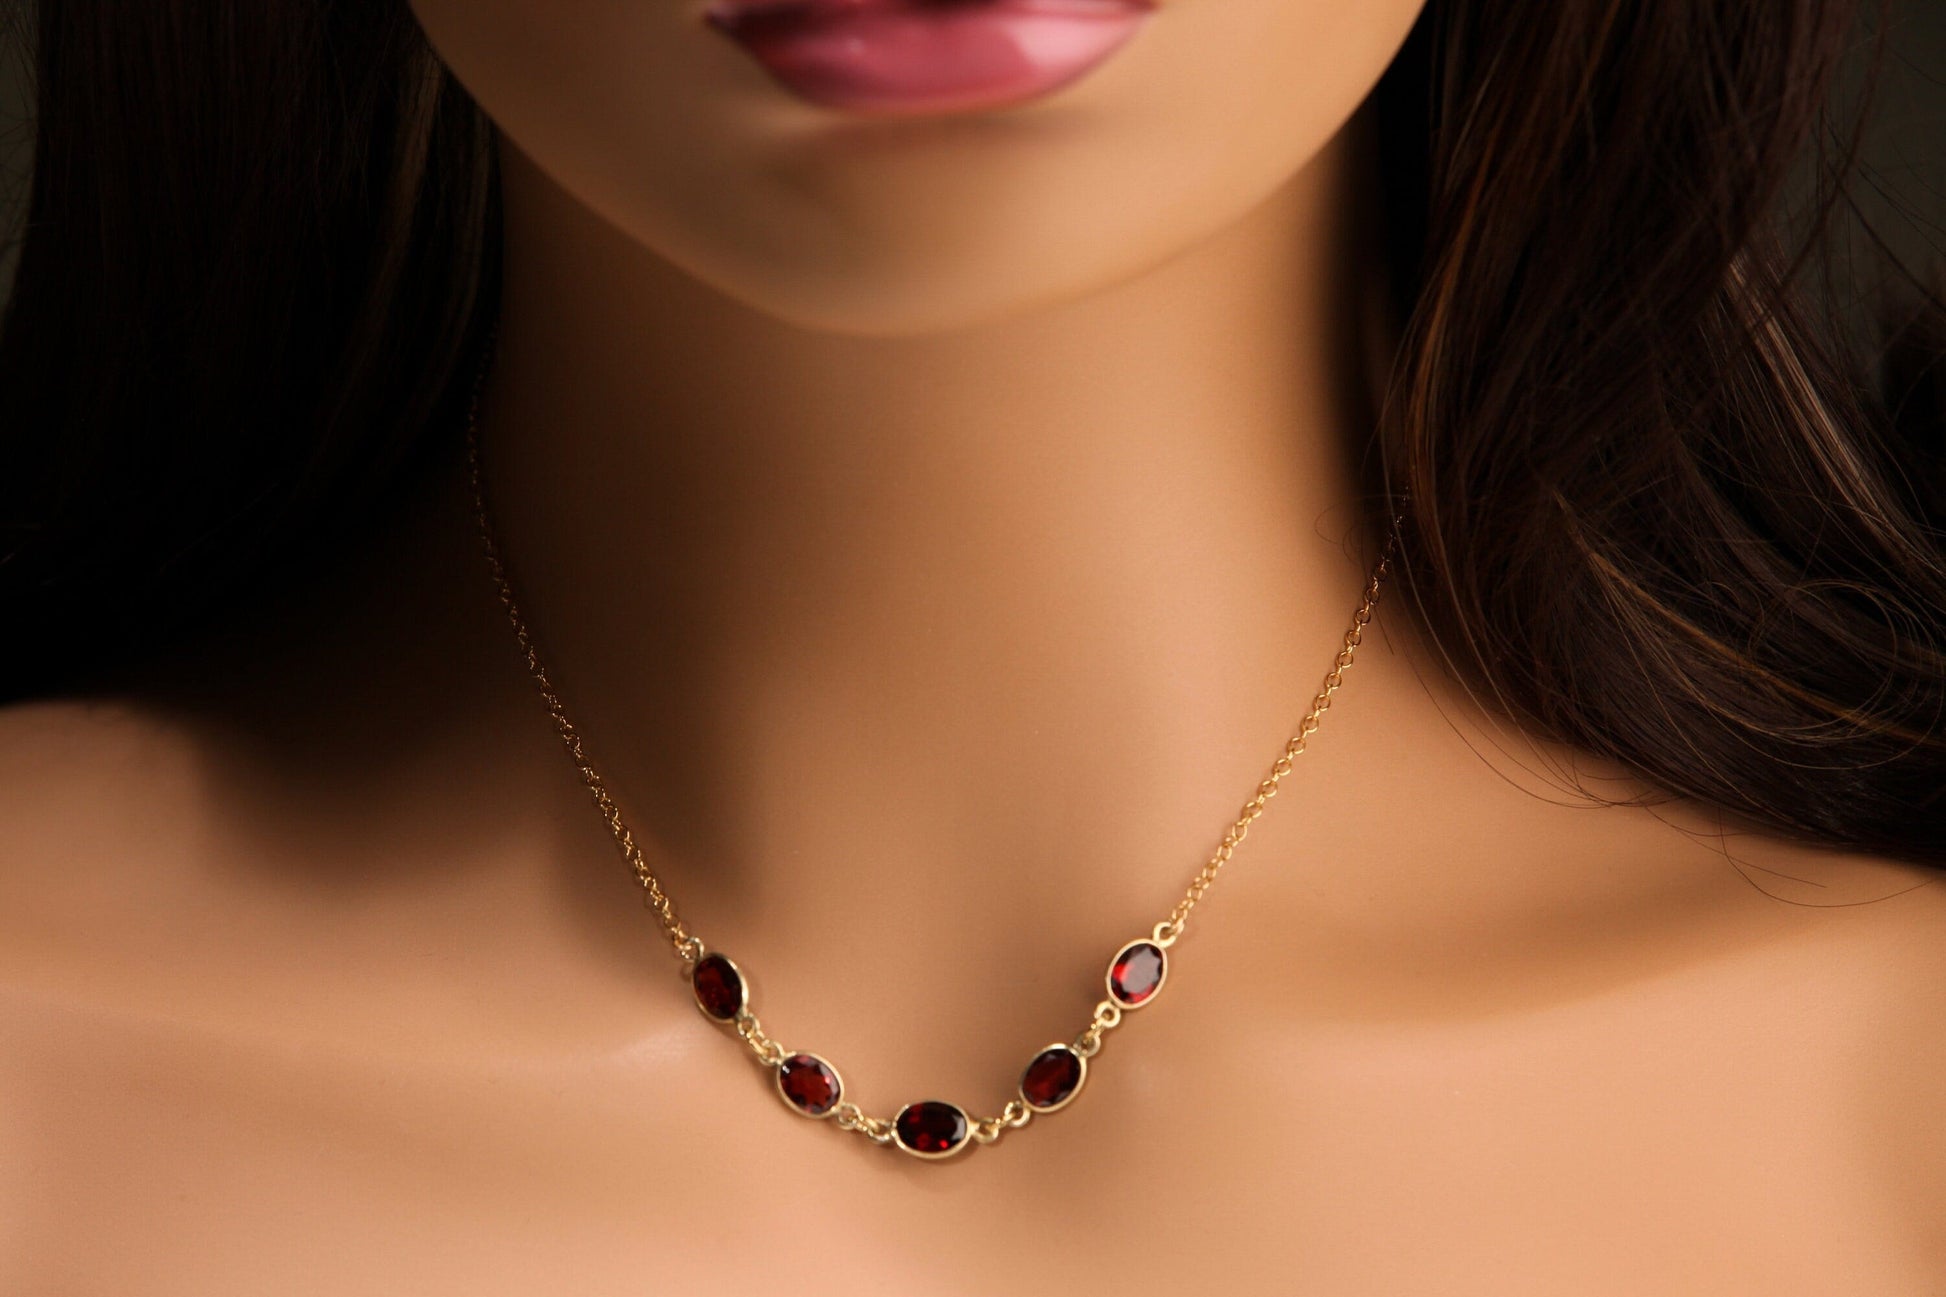 Genuine Garnet Faceted Merlot Red 6x10mm Oval Bezel 14K Gold Filled Cable Chain Necklace, Bridal, January Birthstone, Valentine Gift